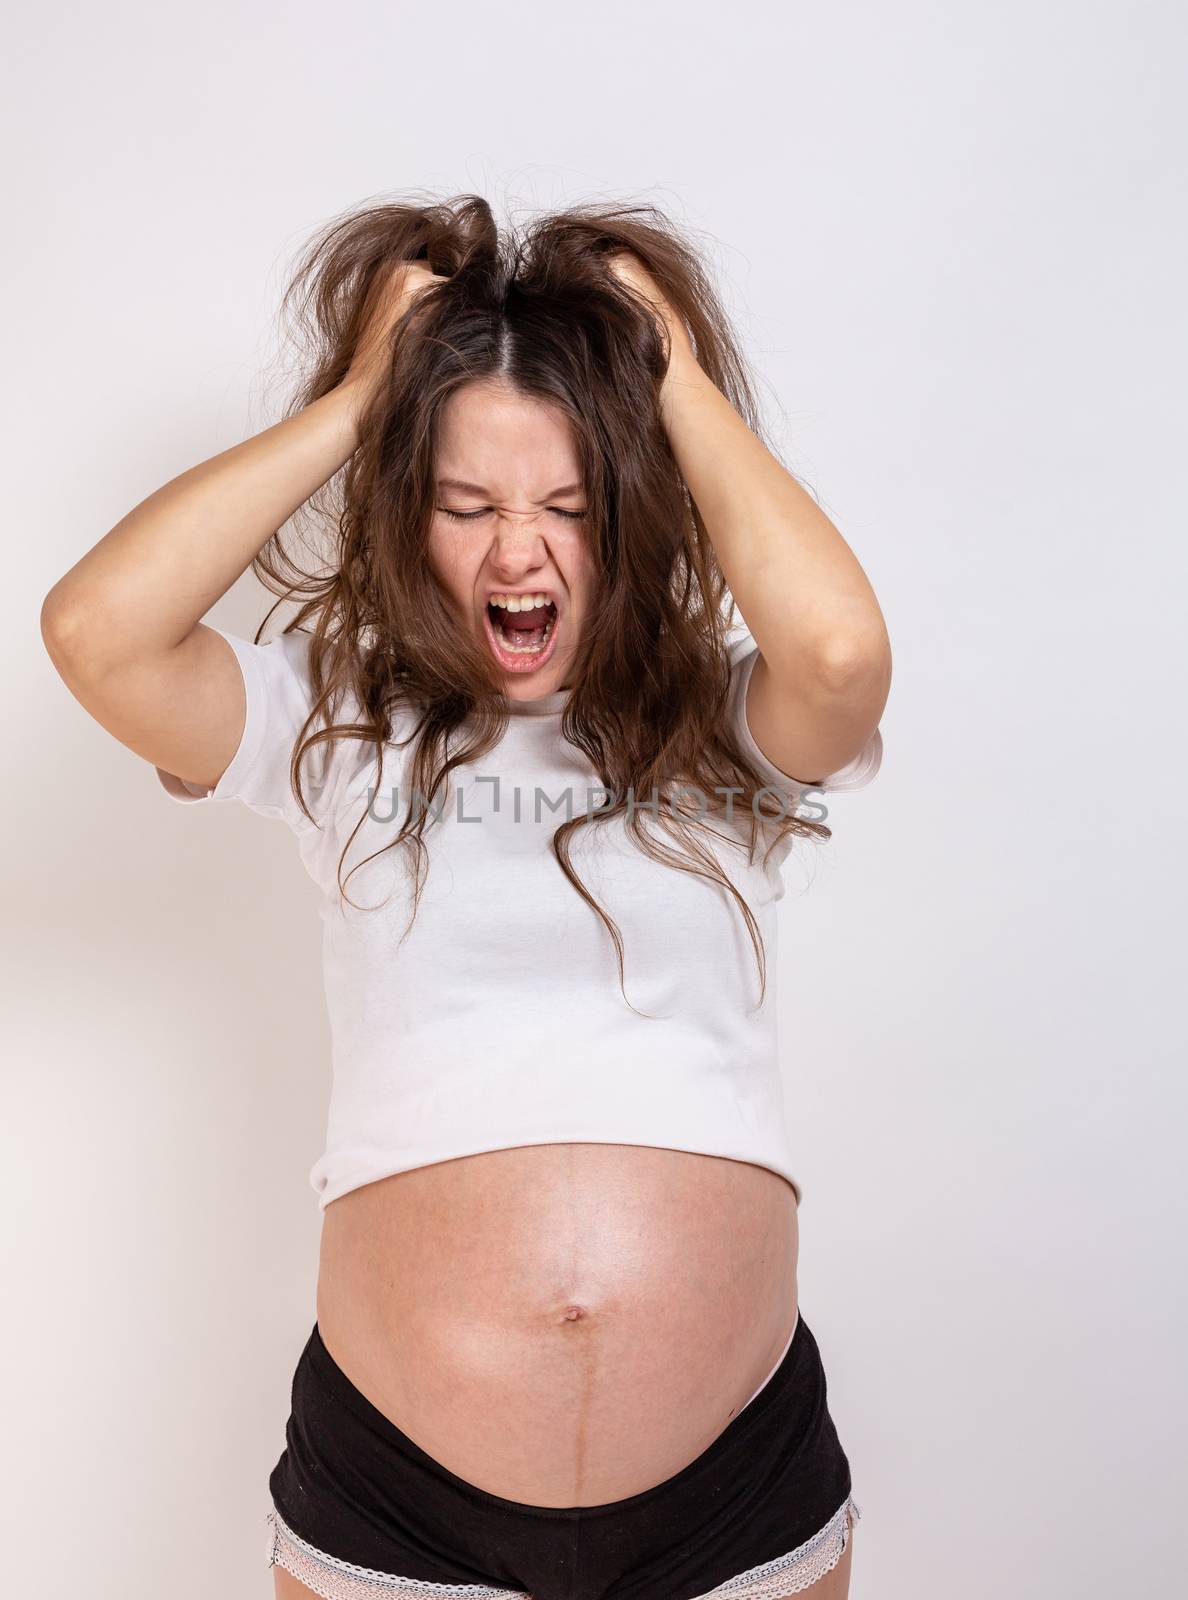 The young beautiful pregnant woman experiences strong emotions on a white background by Vassiliy